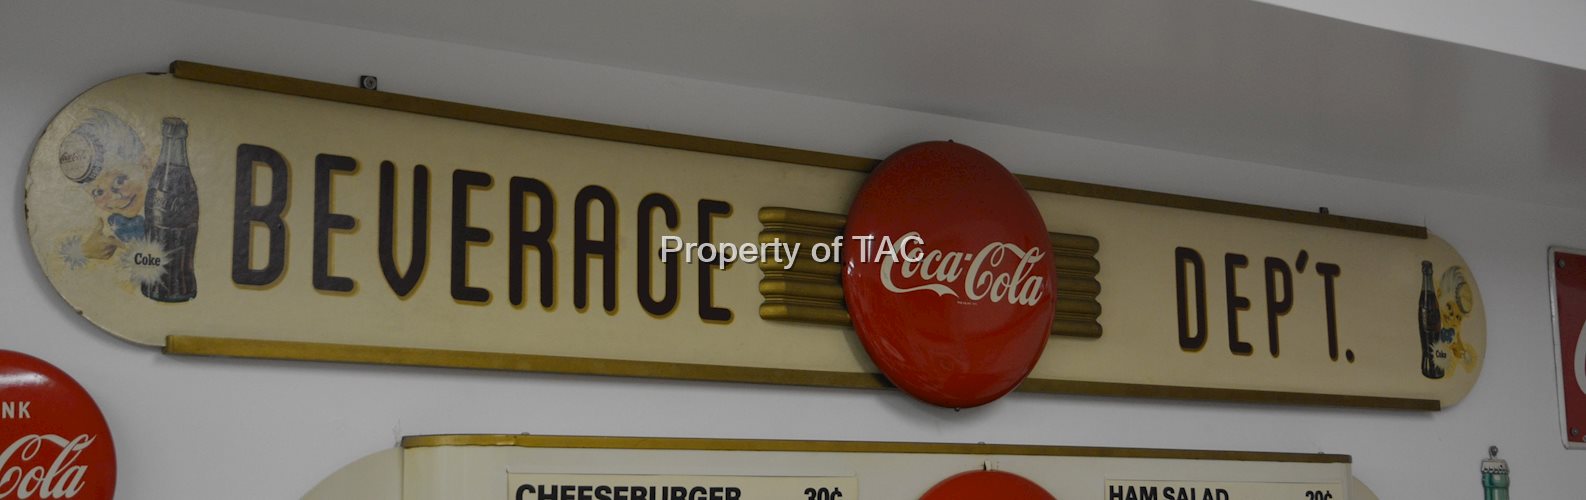 Coca-Cola button on a Kay Display back